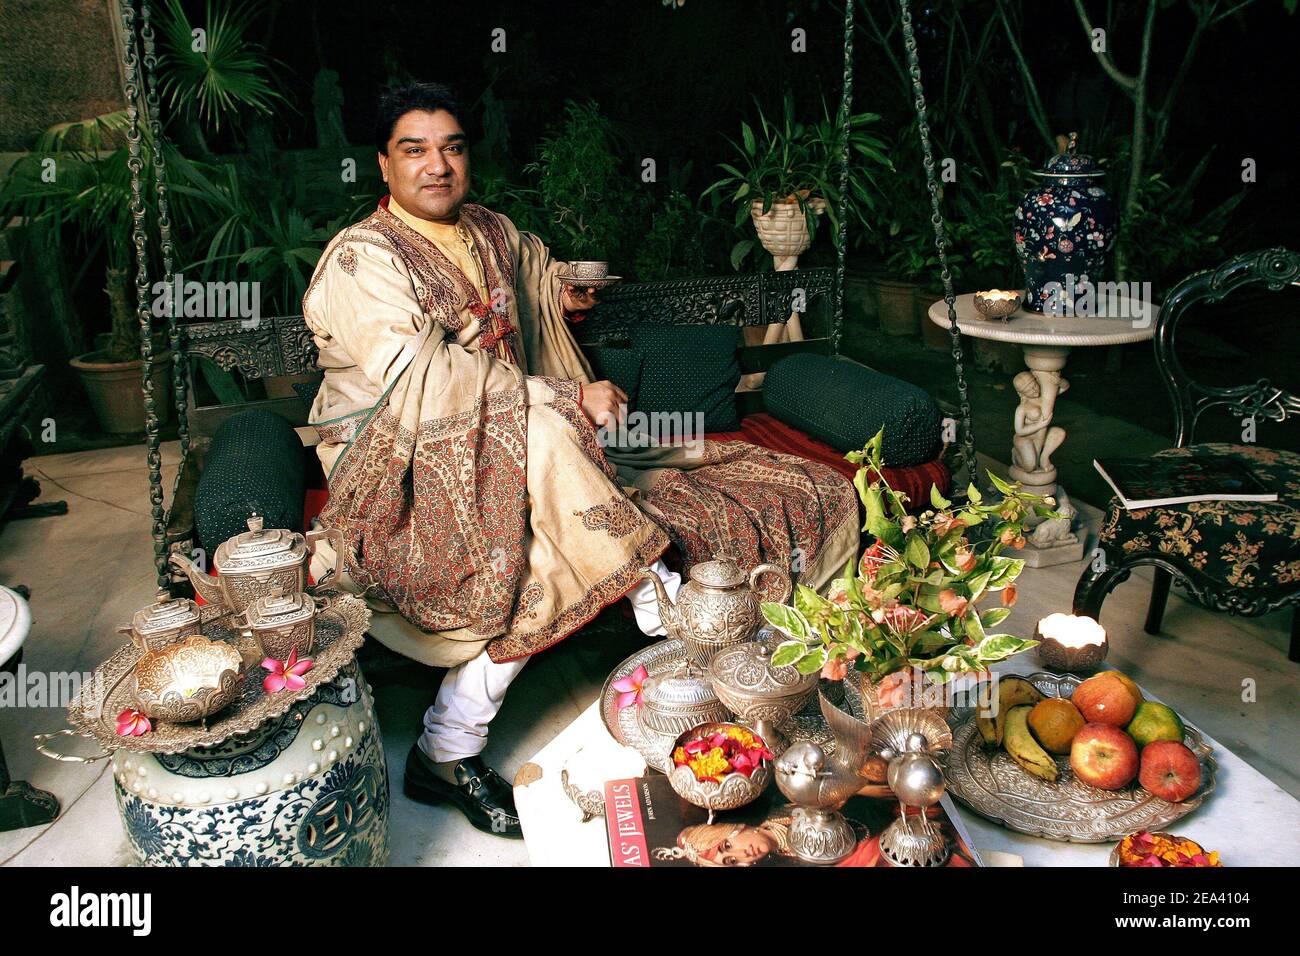 EXCLUSIVE. Umang Hutheesing, Lord of Ahmedabad, poses in his recently restored palace in Ahmedabad, Gujarat State, India, in March 2005. Photo by Alexis Orand/ABACA. Stock Photo